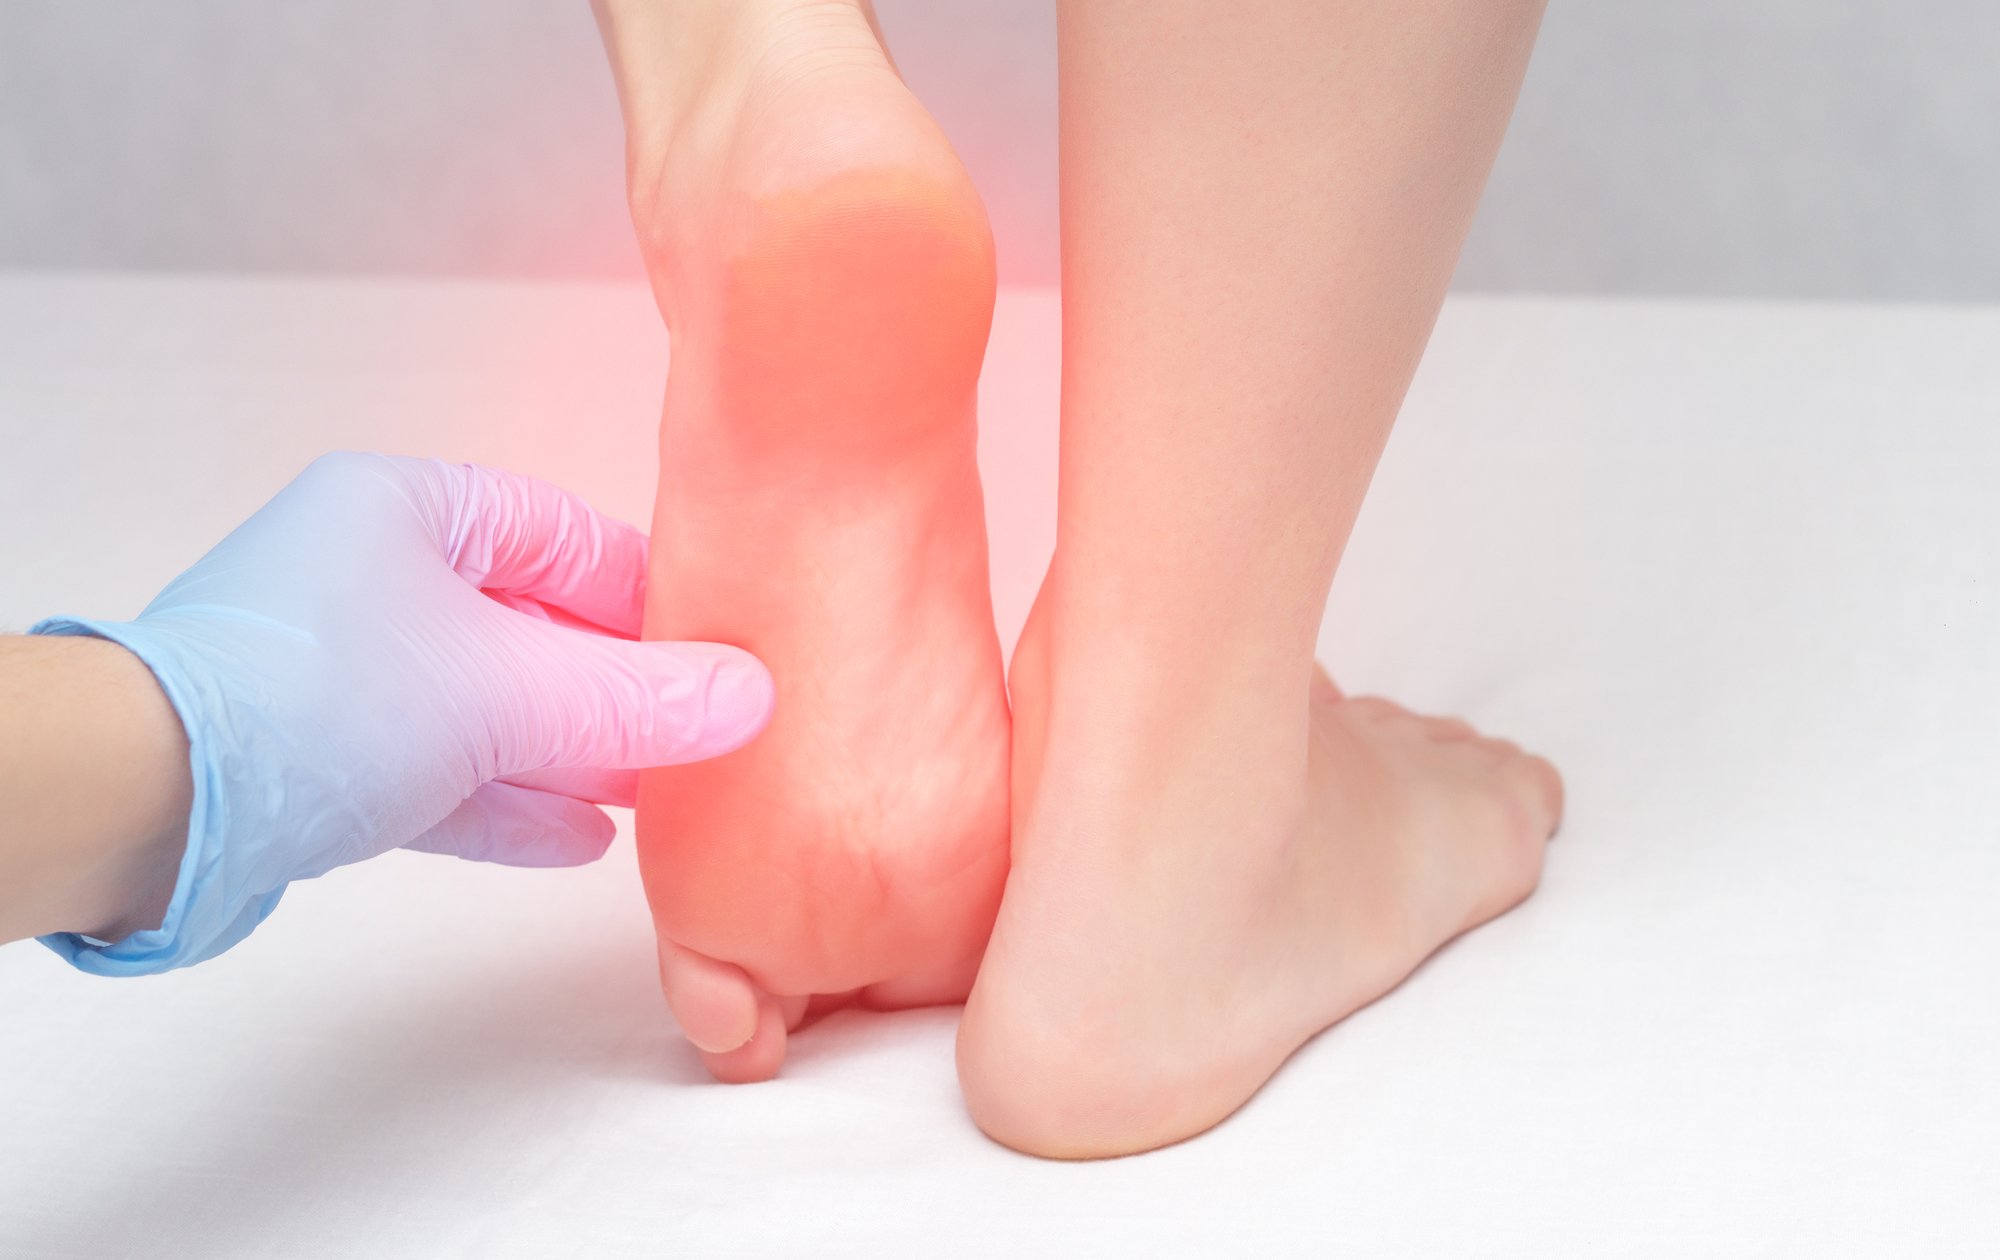 Can Uric Acid Cause Heel Pain? Signs of 